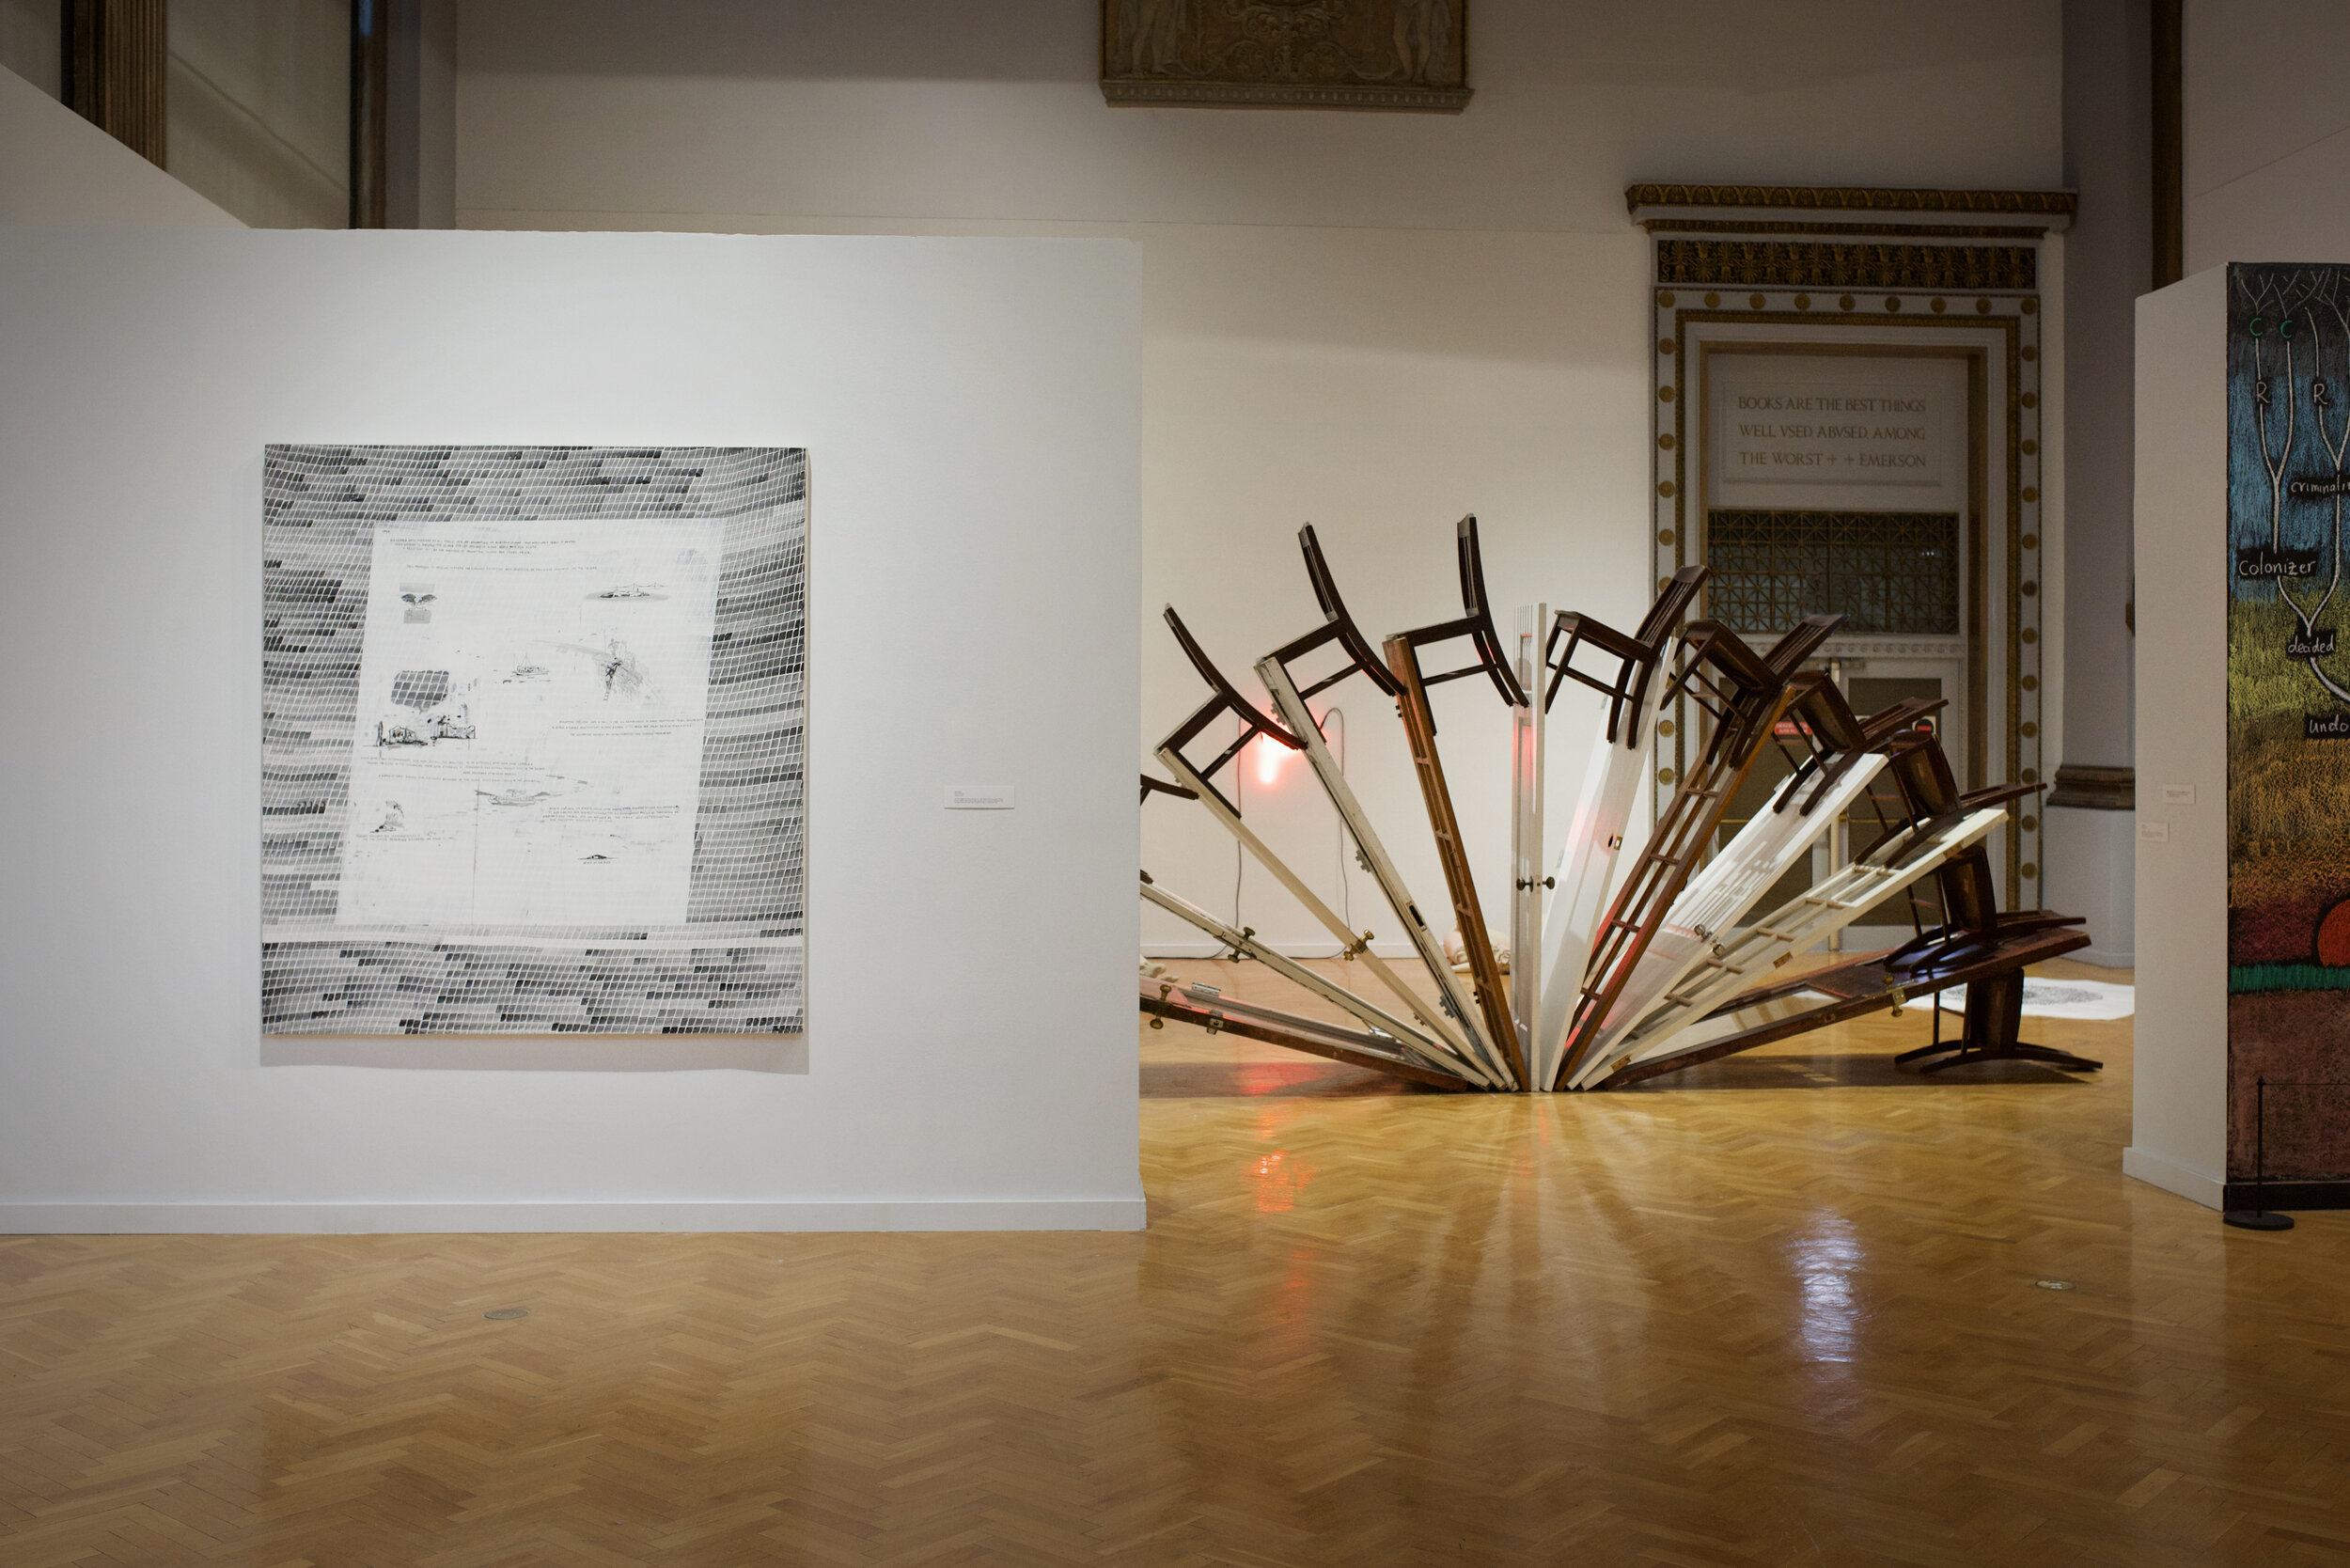  Installation view of work, left to right: Derek Chan, Alberto Aguilar – photo by Gloria Arroyo. 